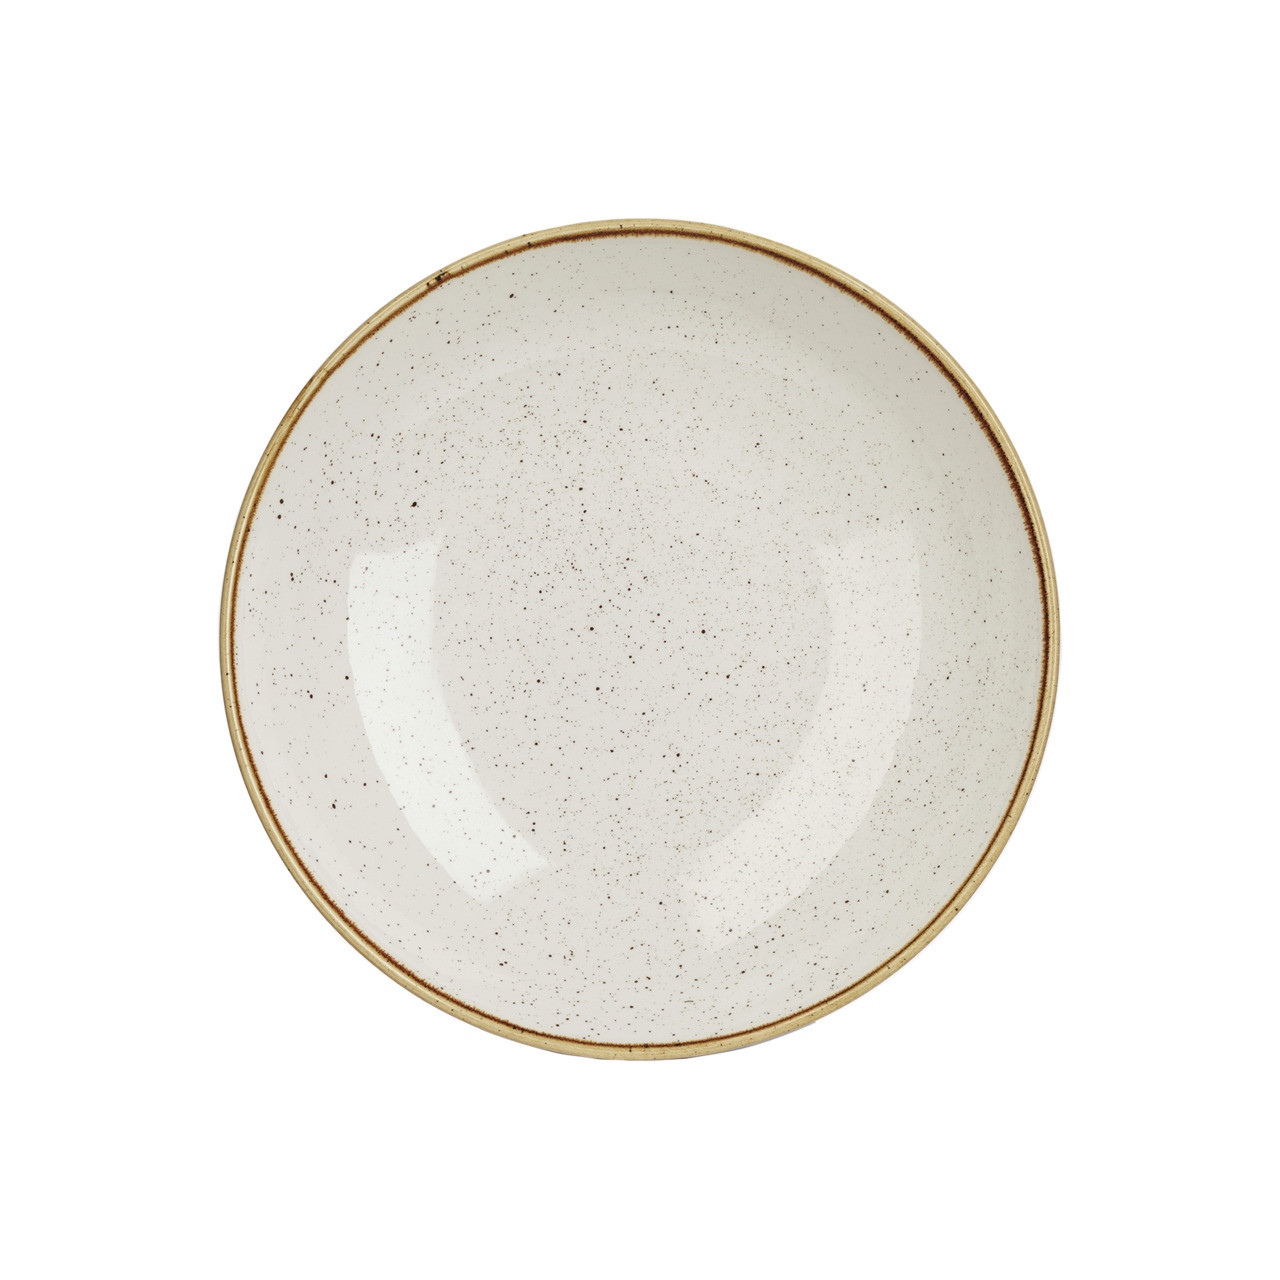 Stonecast, Bowl Coupe ø 248 mm / 1,14 l Barley White